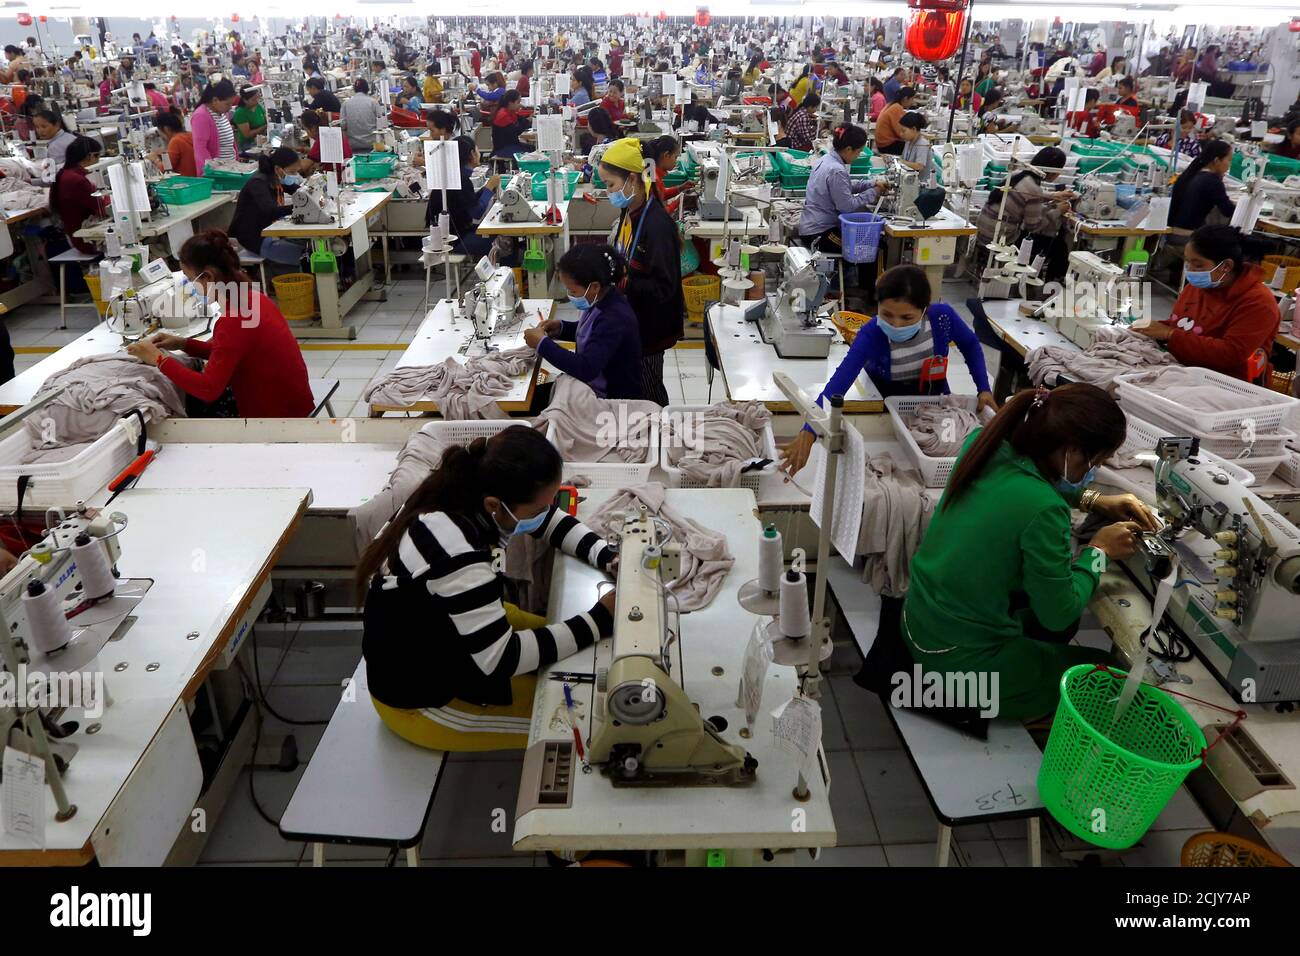 Employees work at a factory supplier of the H&M brand in Kandal province,  Cambodia, December 12, 2018. REUTERS/Samrang Pring TPX IMAGES OF THE DAY  Stock Photo - Alamy